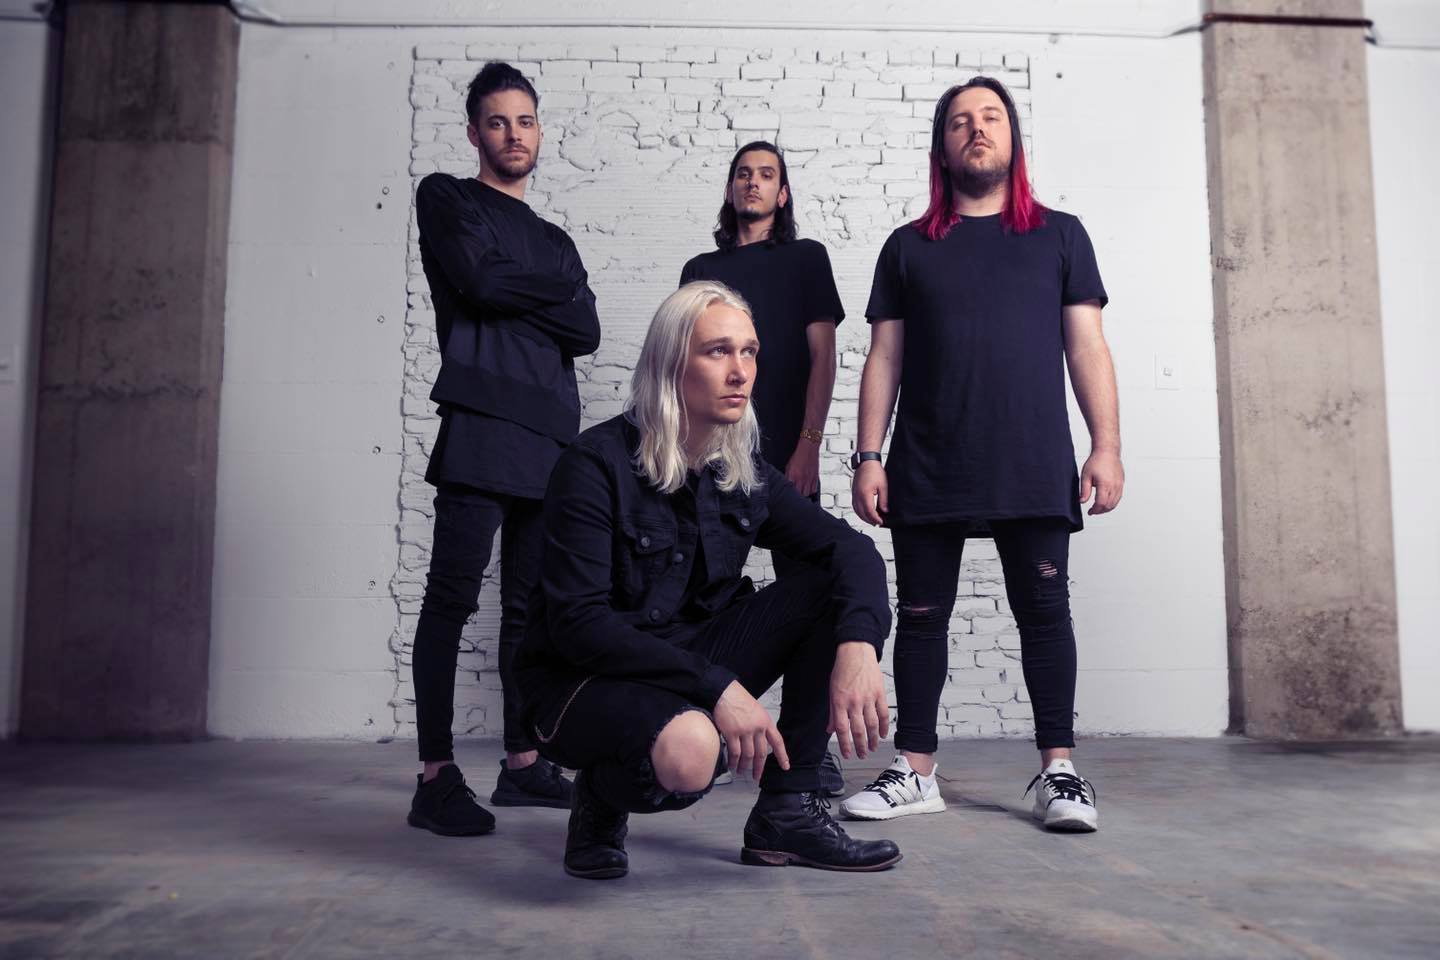 AFTERLIFE PREMIERE NEW SINGLE “WASTING TIME”